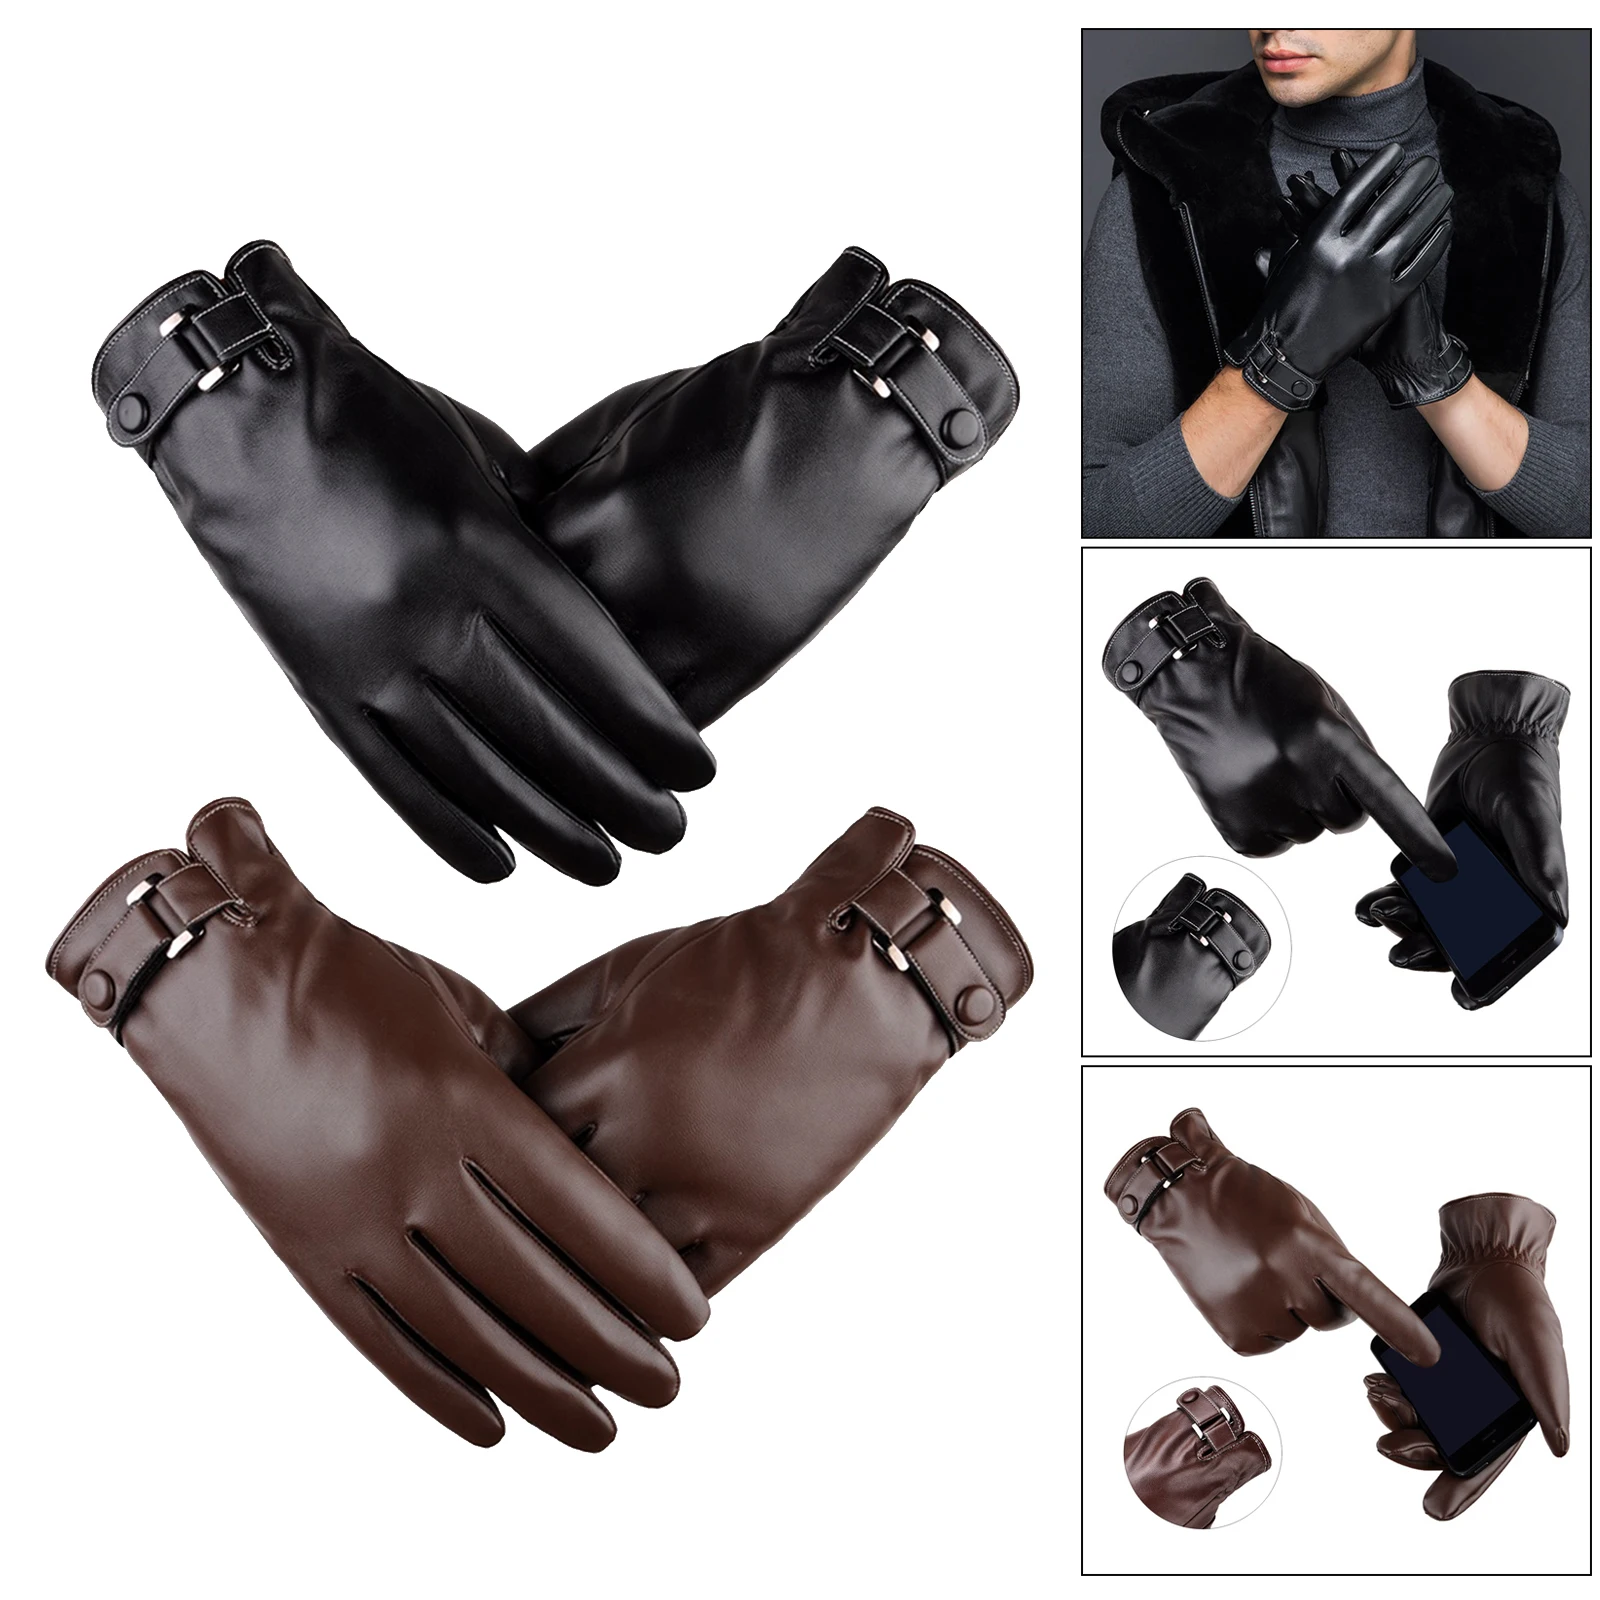 Touch Screen Gloves PU Leather Army Military Combat Outdoor Sport Cycling Paintball Hunting Swat